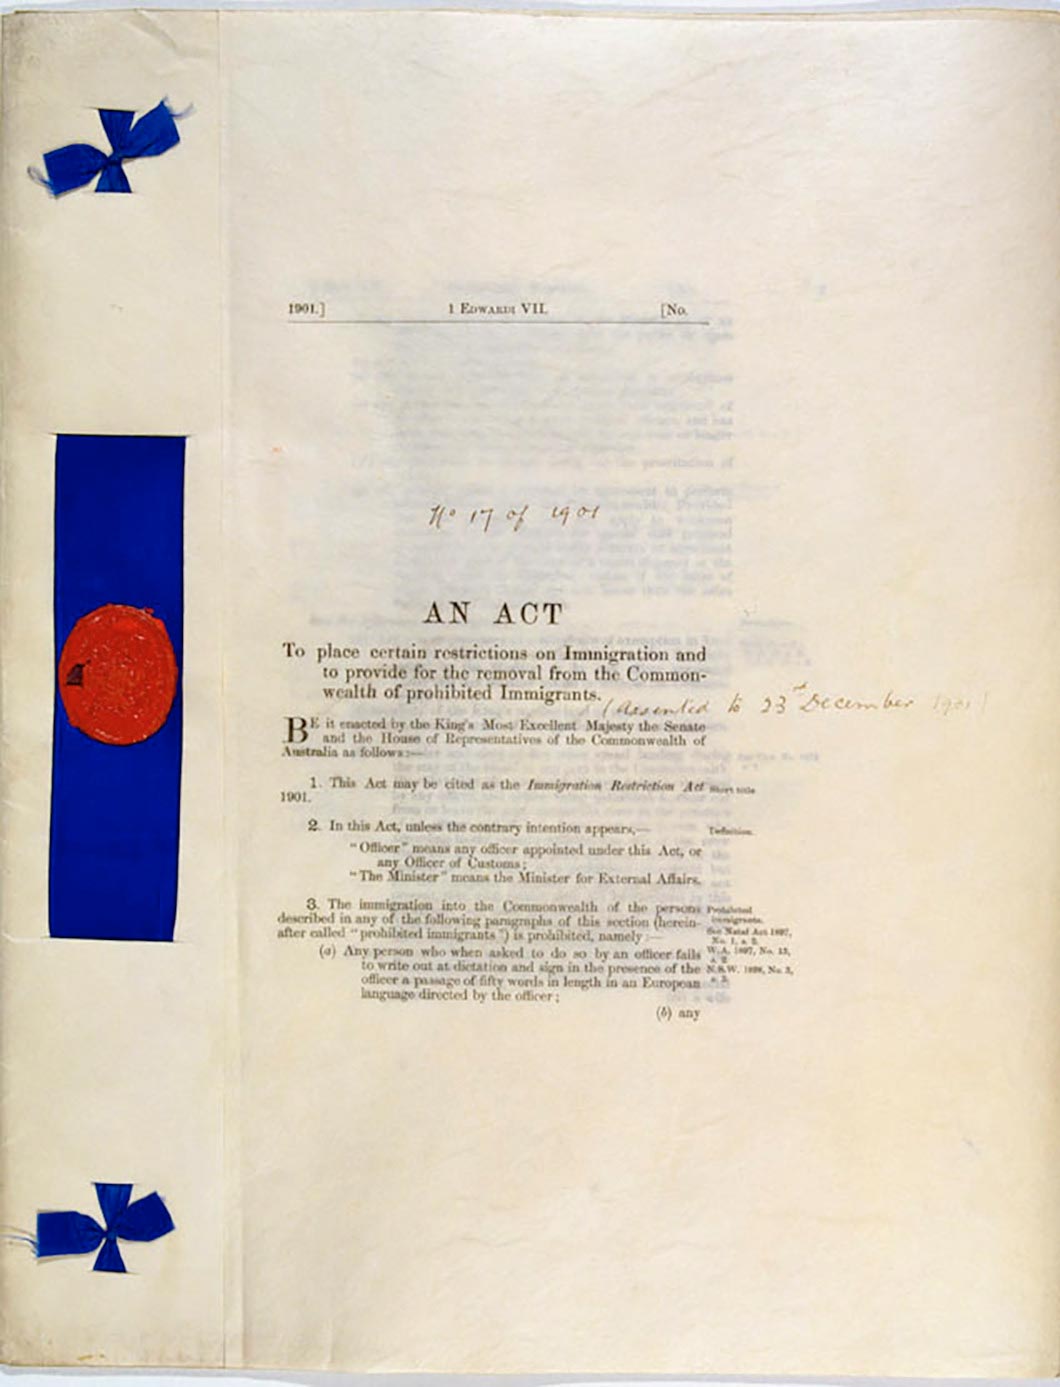 <p>First page of the <em>Immigration Restriction Act 1901</em></p>
